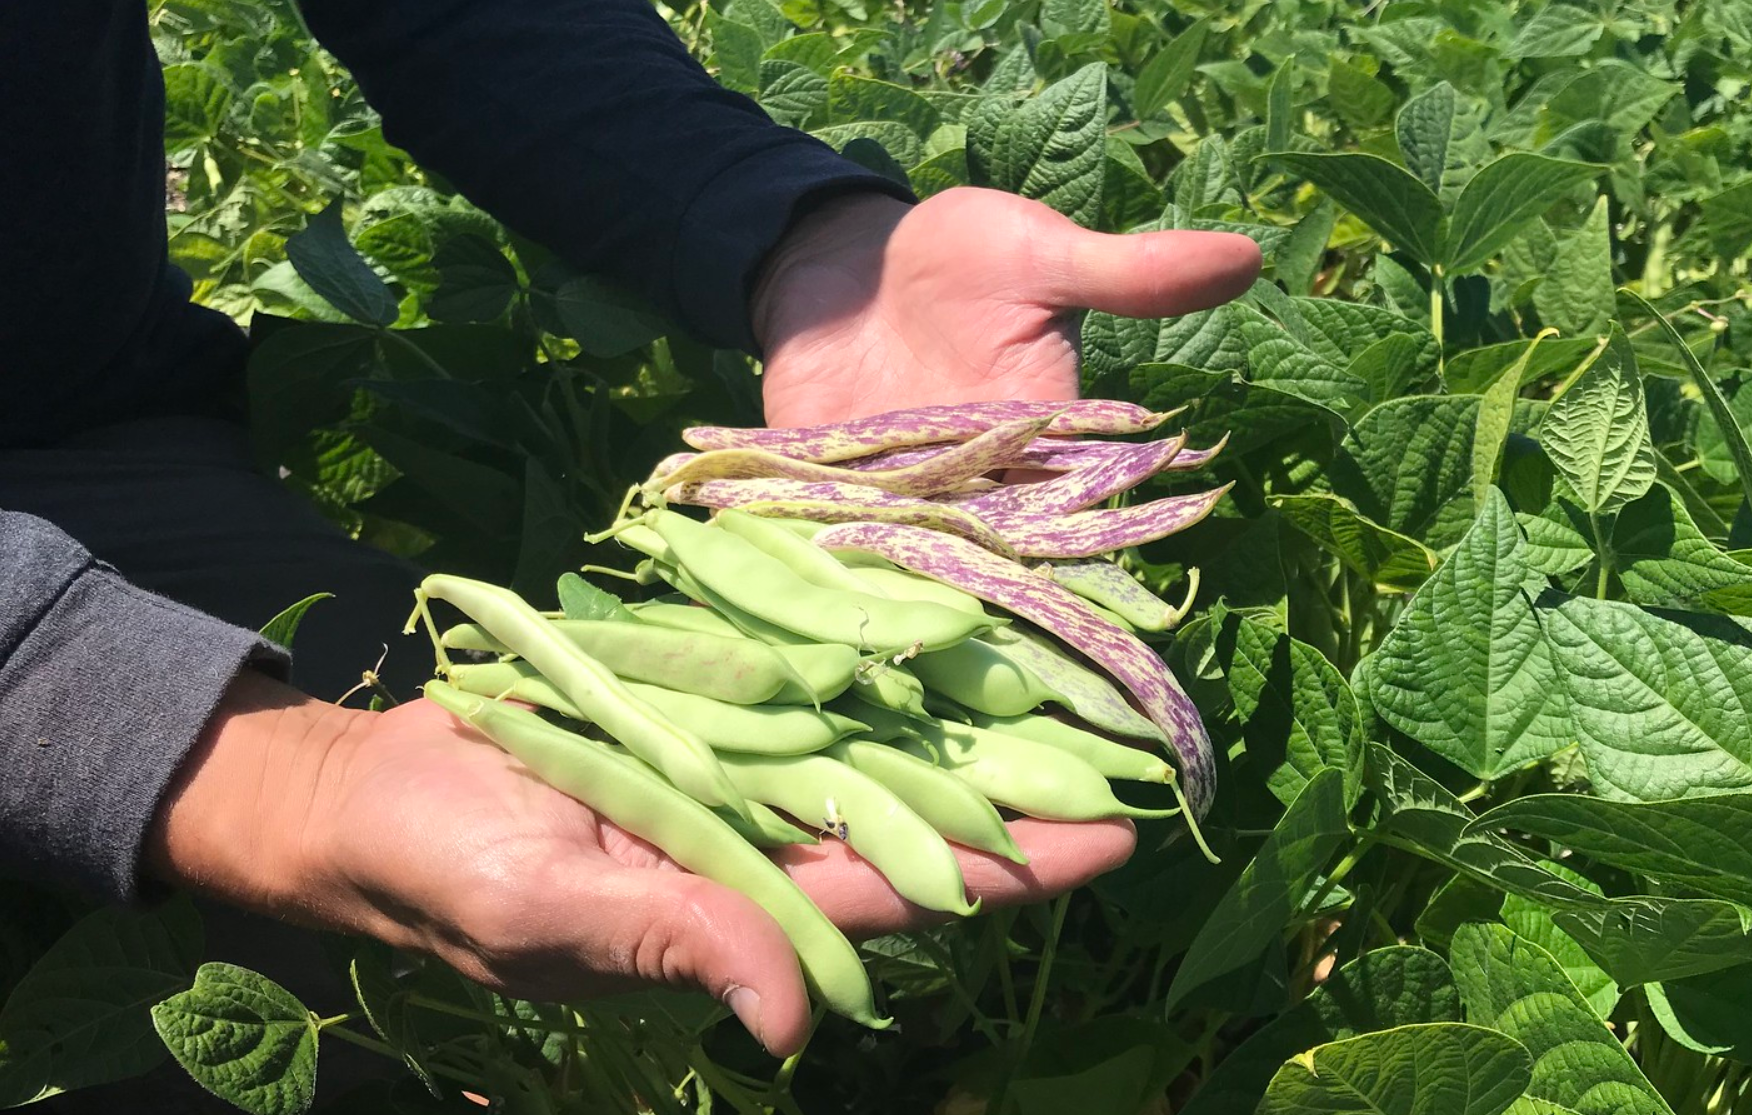 A pair of hands holding freshly picked green beans.